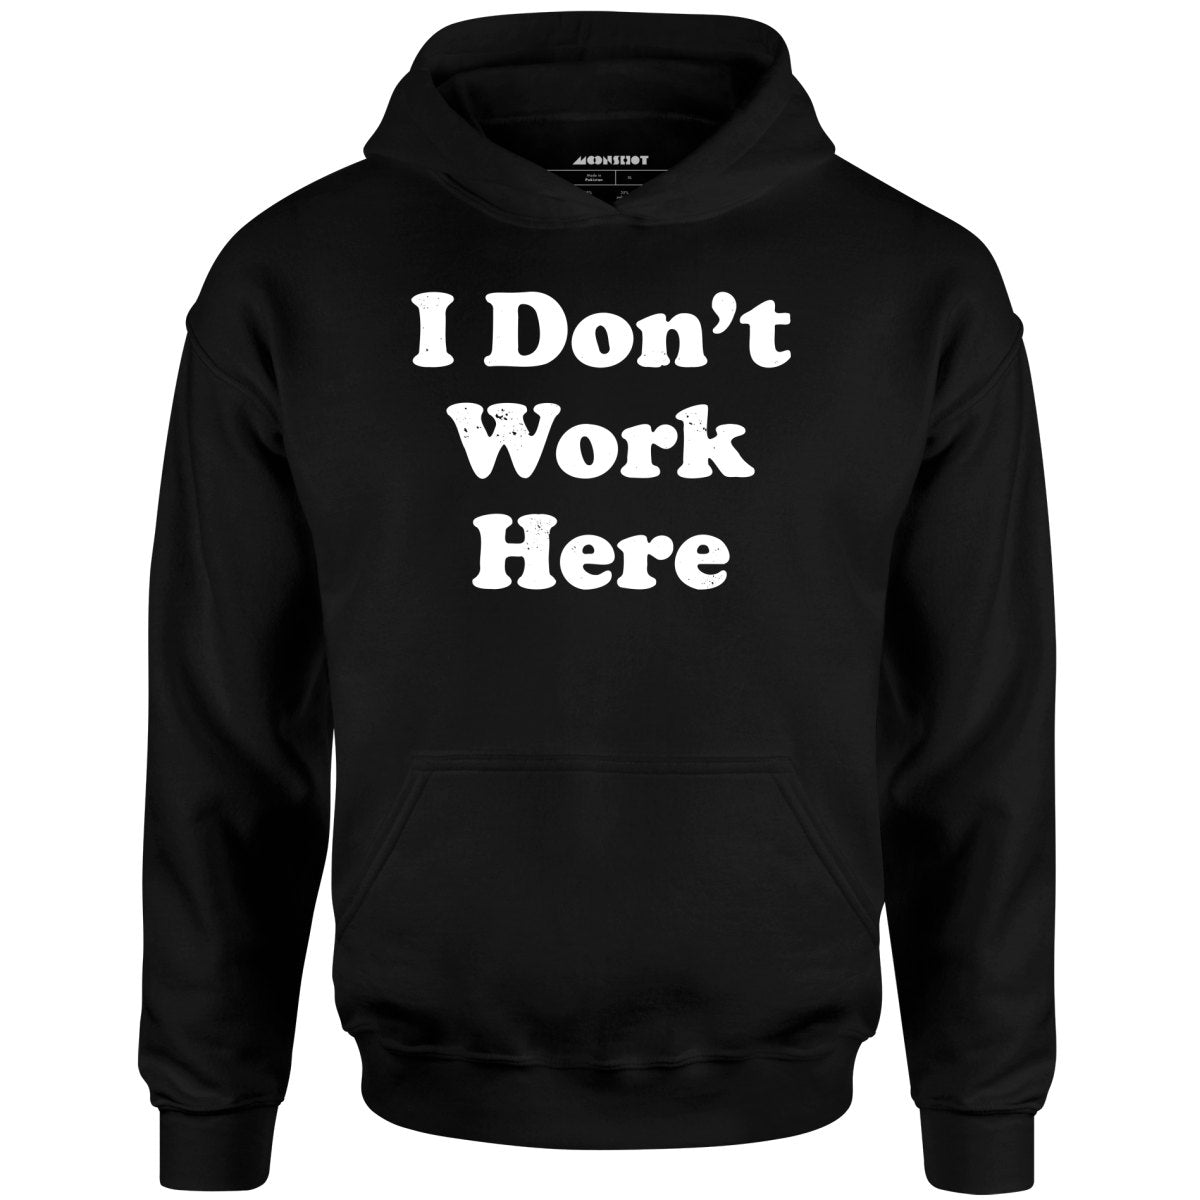 I Don't Work Here - Unisex Hoodie